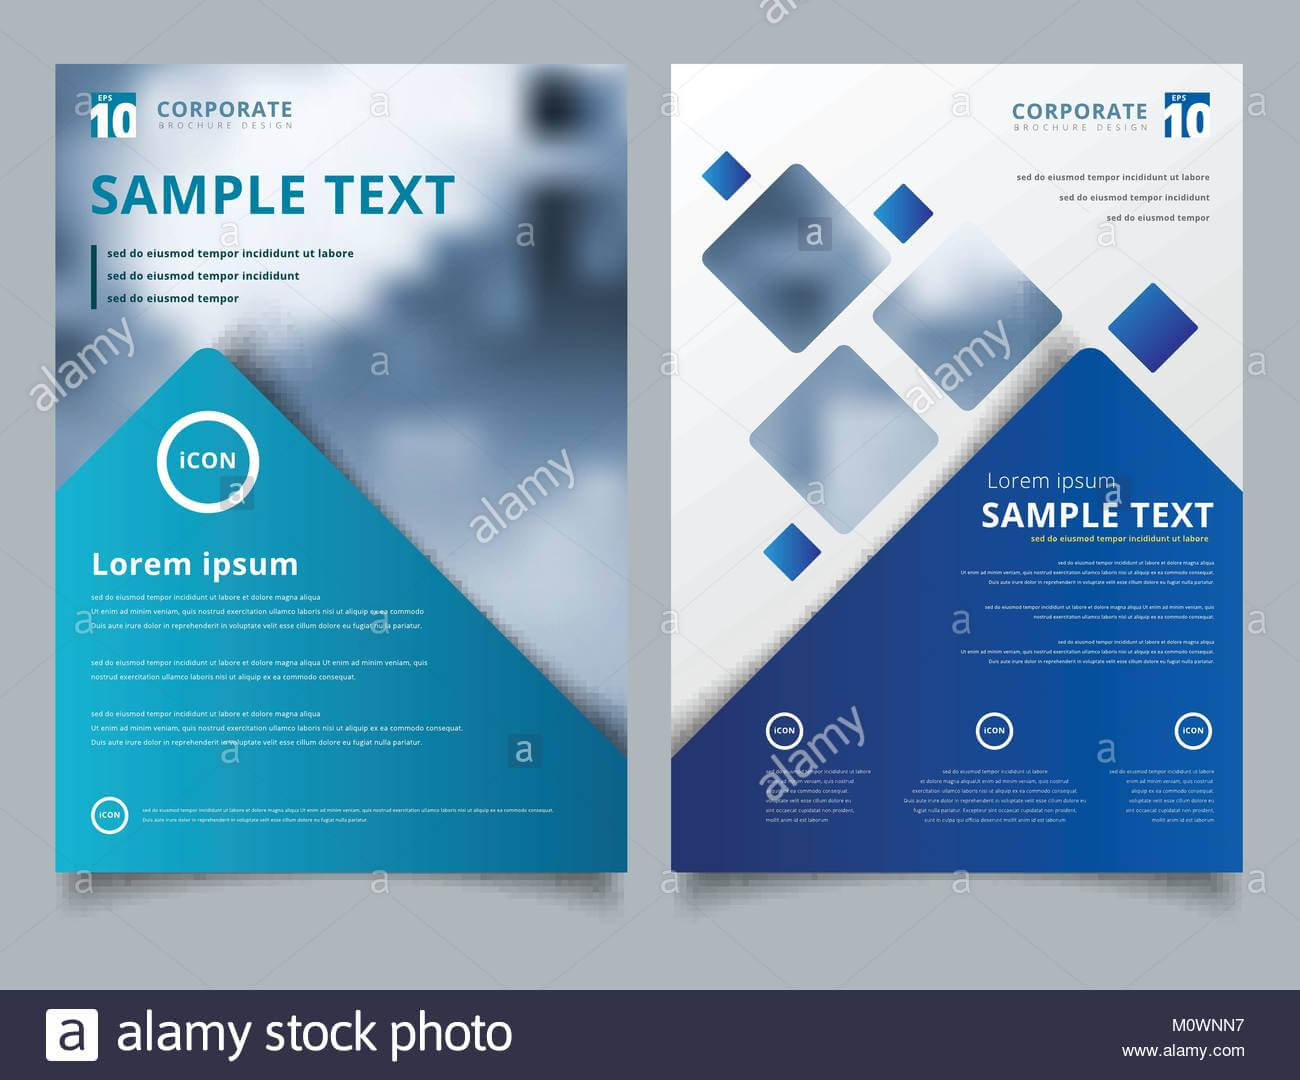 Free Poster Design Templates Illustrator With Scientific Throughout Free Illustrator Brochure Templates Download